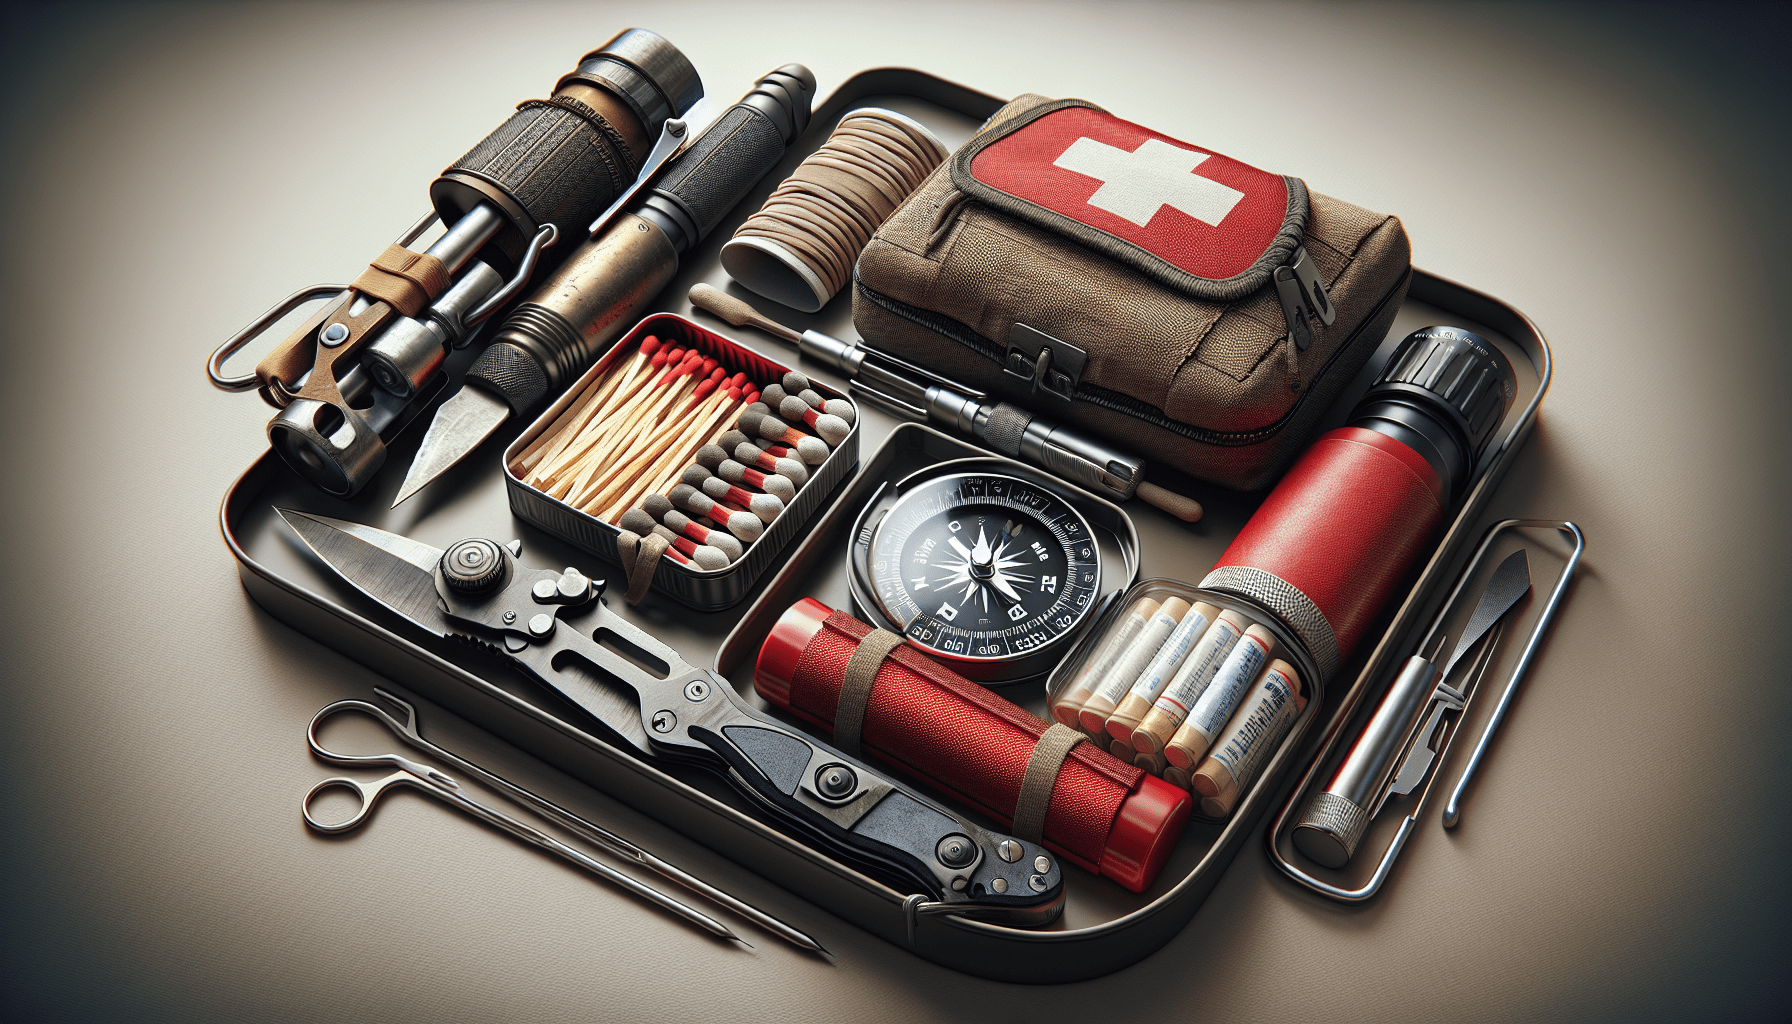 What Are 10 Items In A Survival Kit?